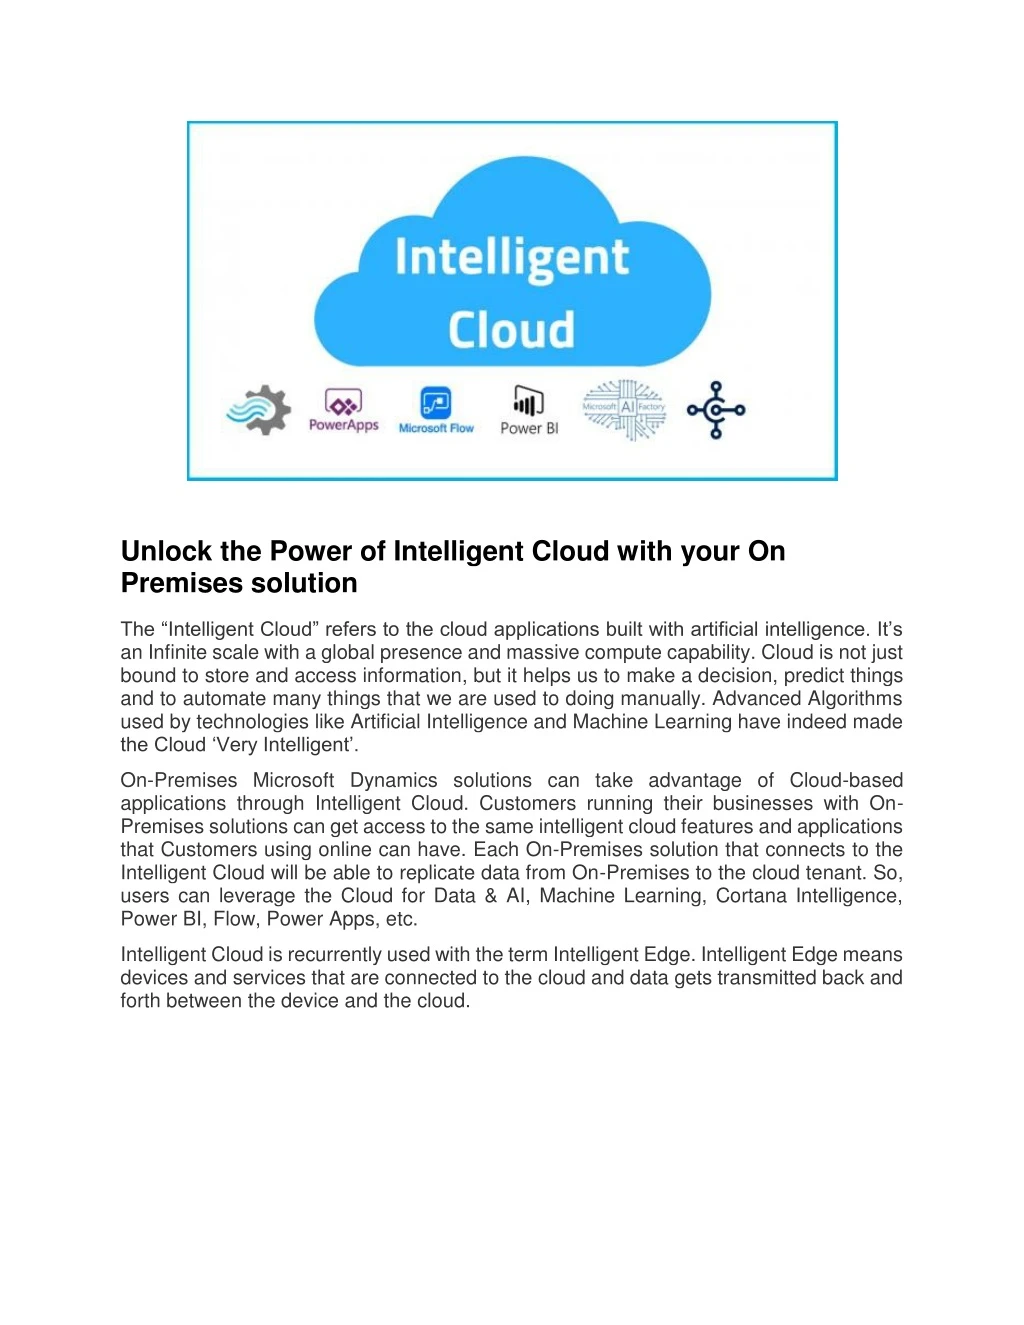 unlock the power of intelligent cloud with your